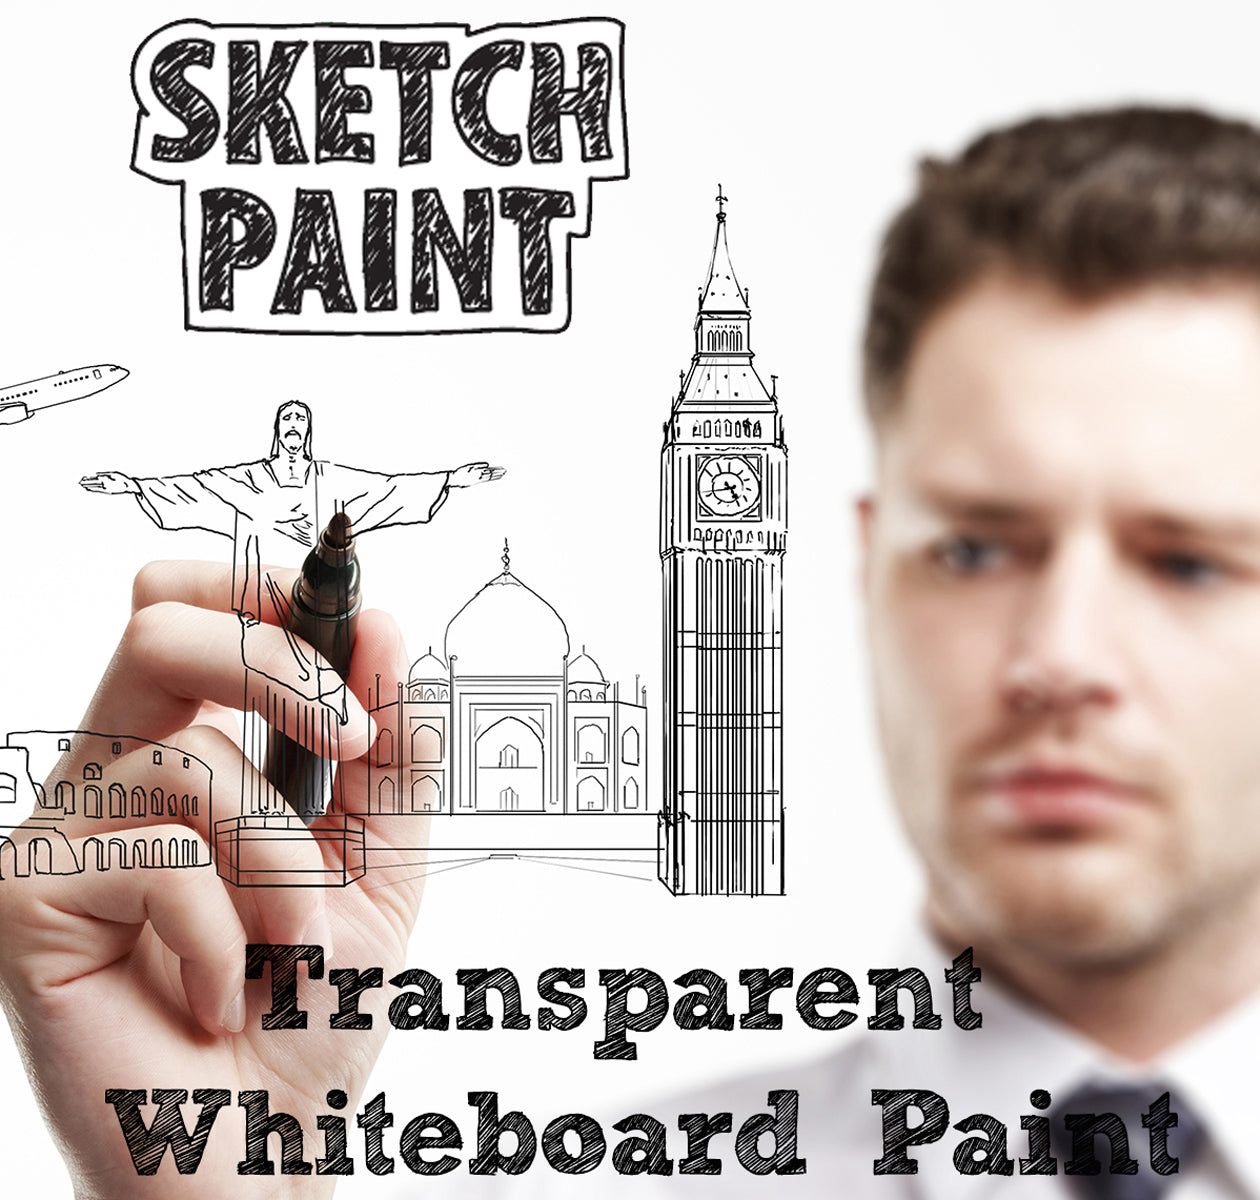 SketchPaint Whiteboard Paint writing